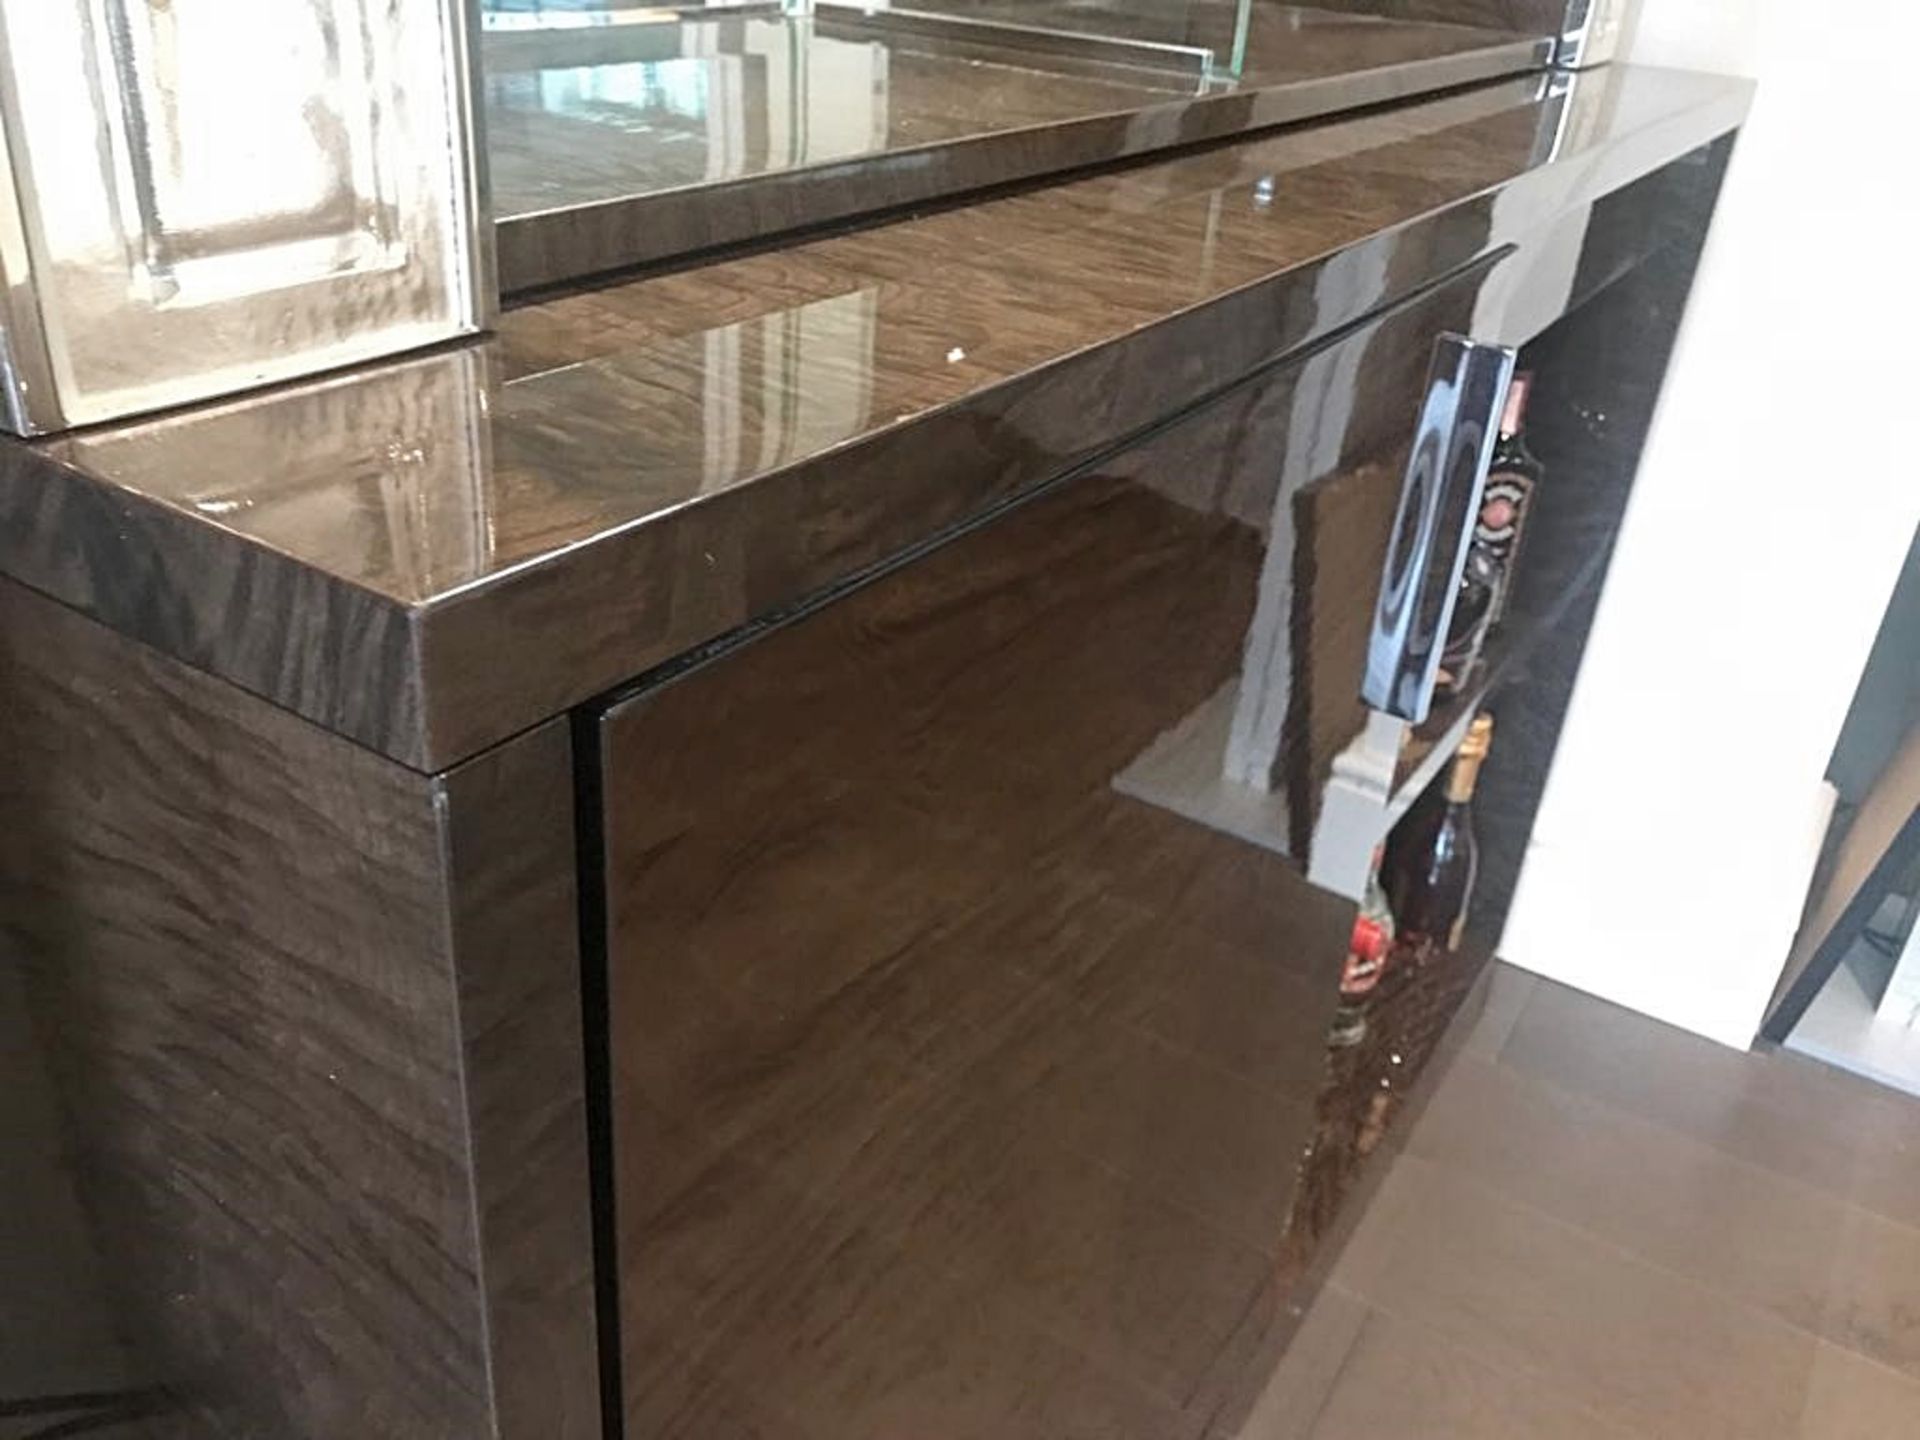 1 x GIORGIO "Absolute" Credenza/Sideboard With A Stunning Venetian Glass Shelved Illuminated Top - Image 9 of 18